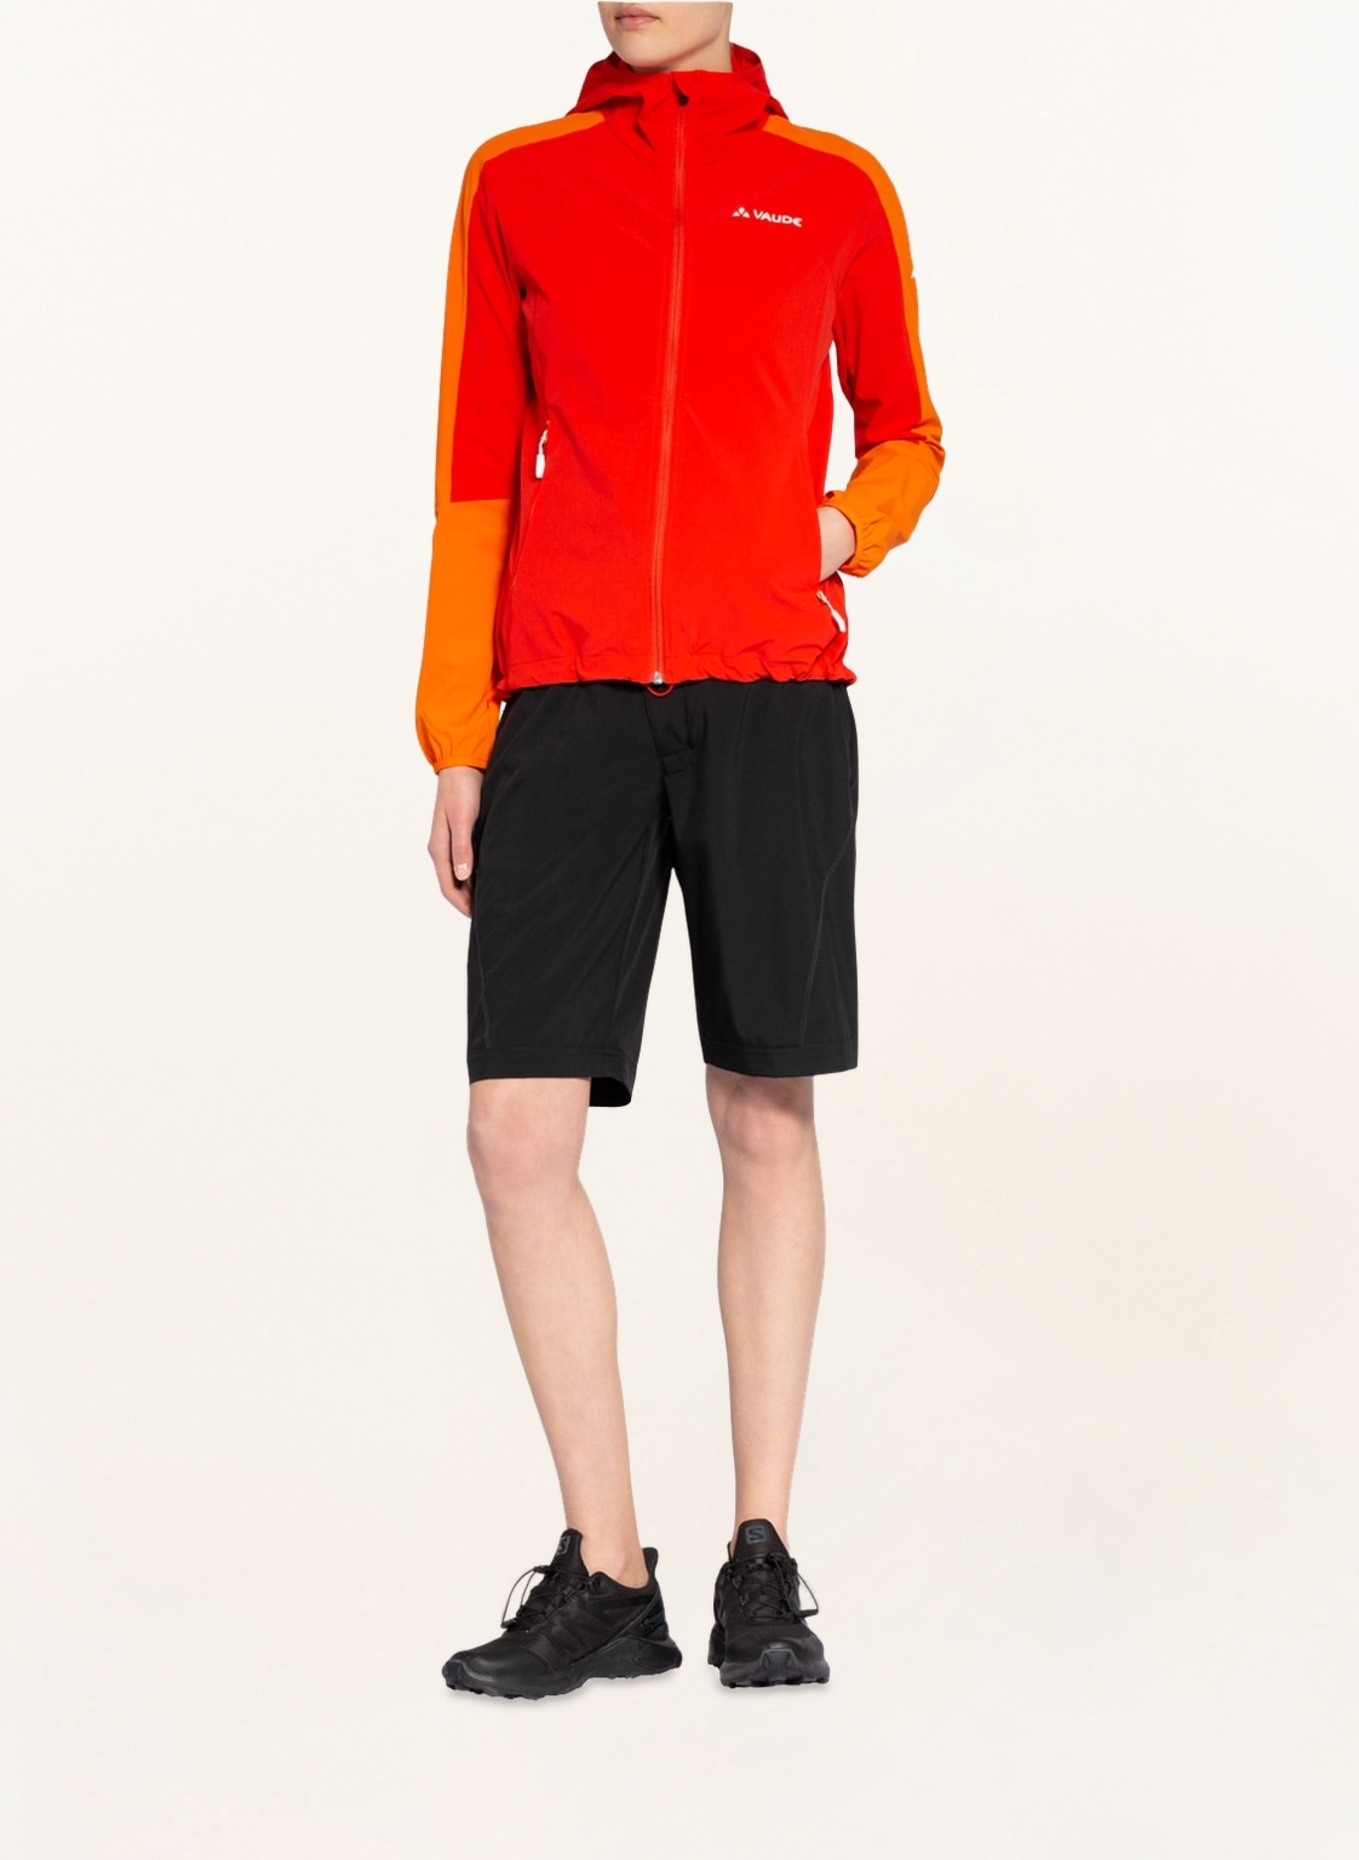 LEDRO shorts in padded VAUDE inner shorts black with Cycling